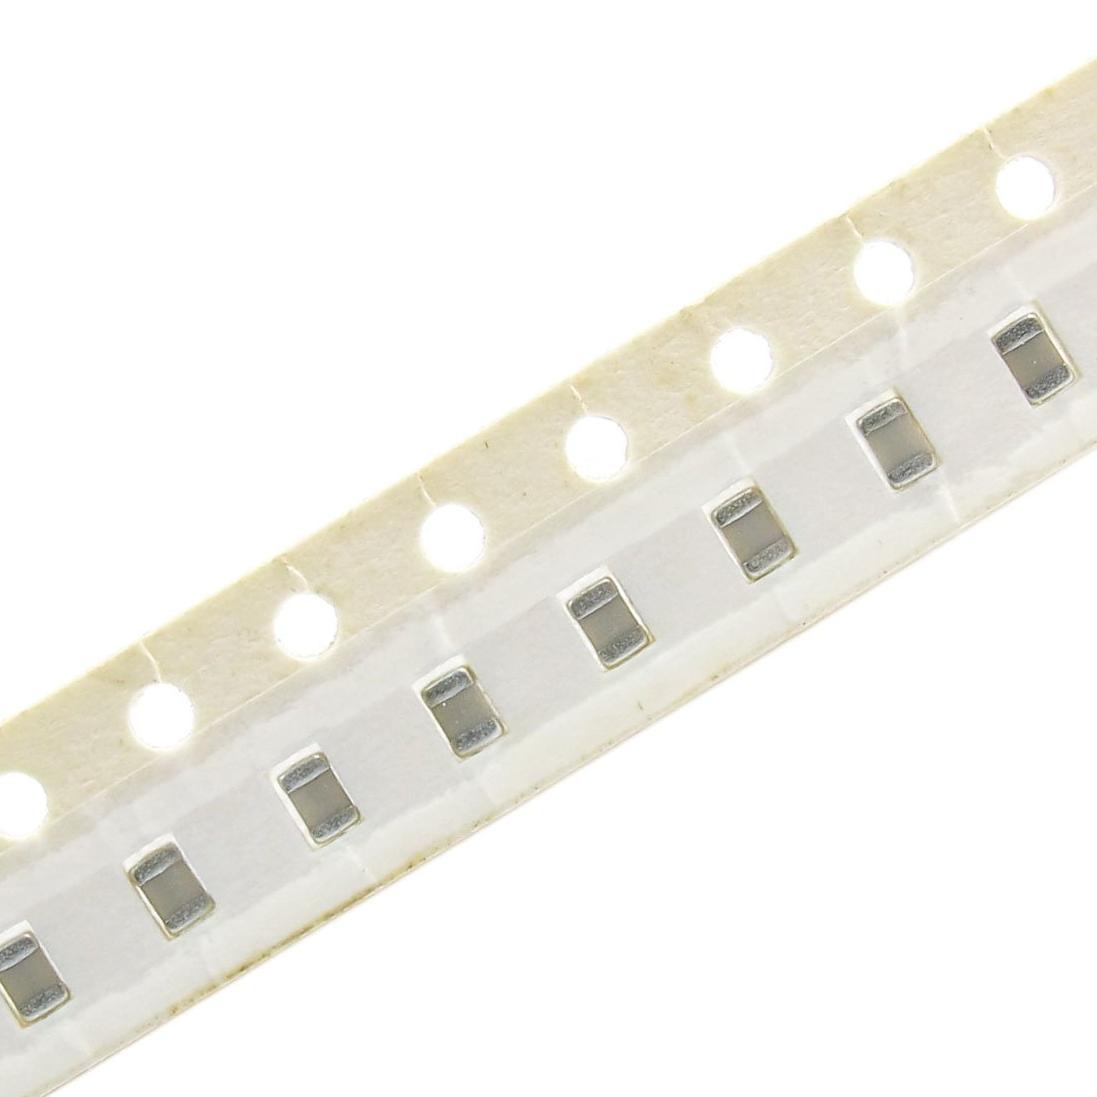  SMD 220pF 0805 C0G(NP0)